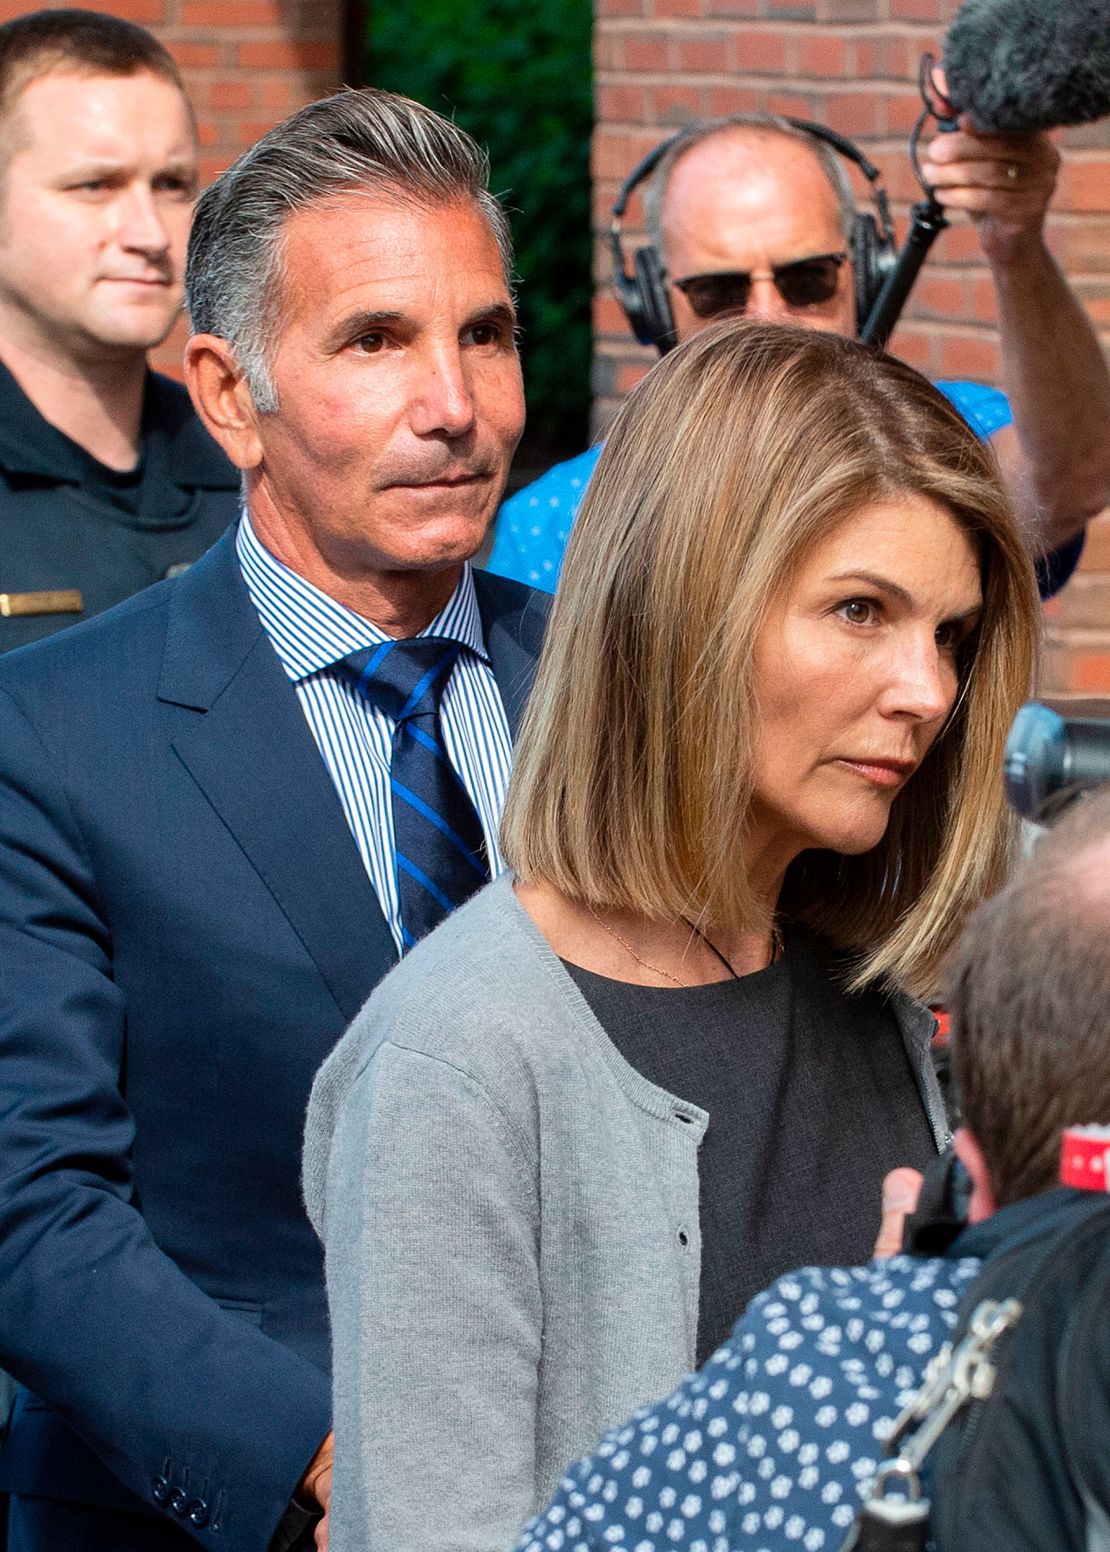 Mossimo Giannulli exits the Boston federal courthouse after a pretrial hearing on August 27, 2019. 